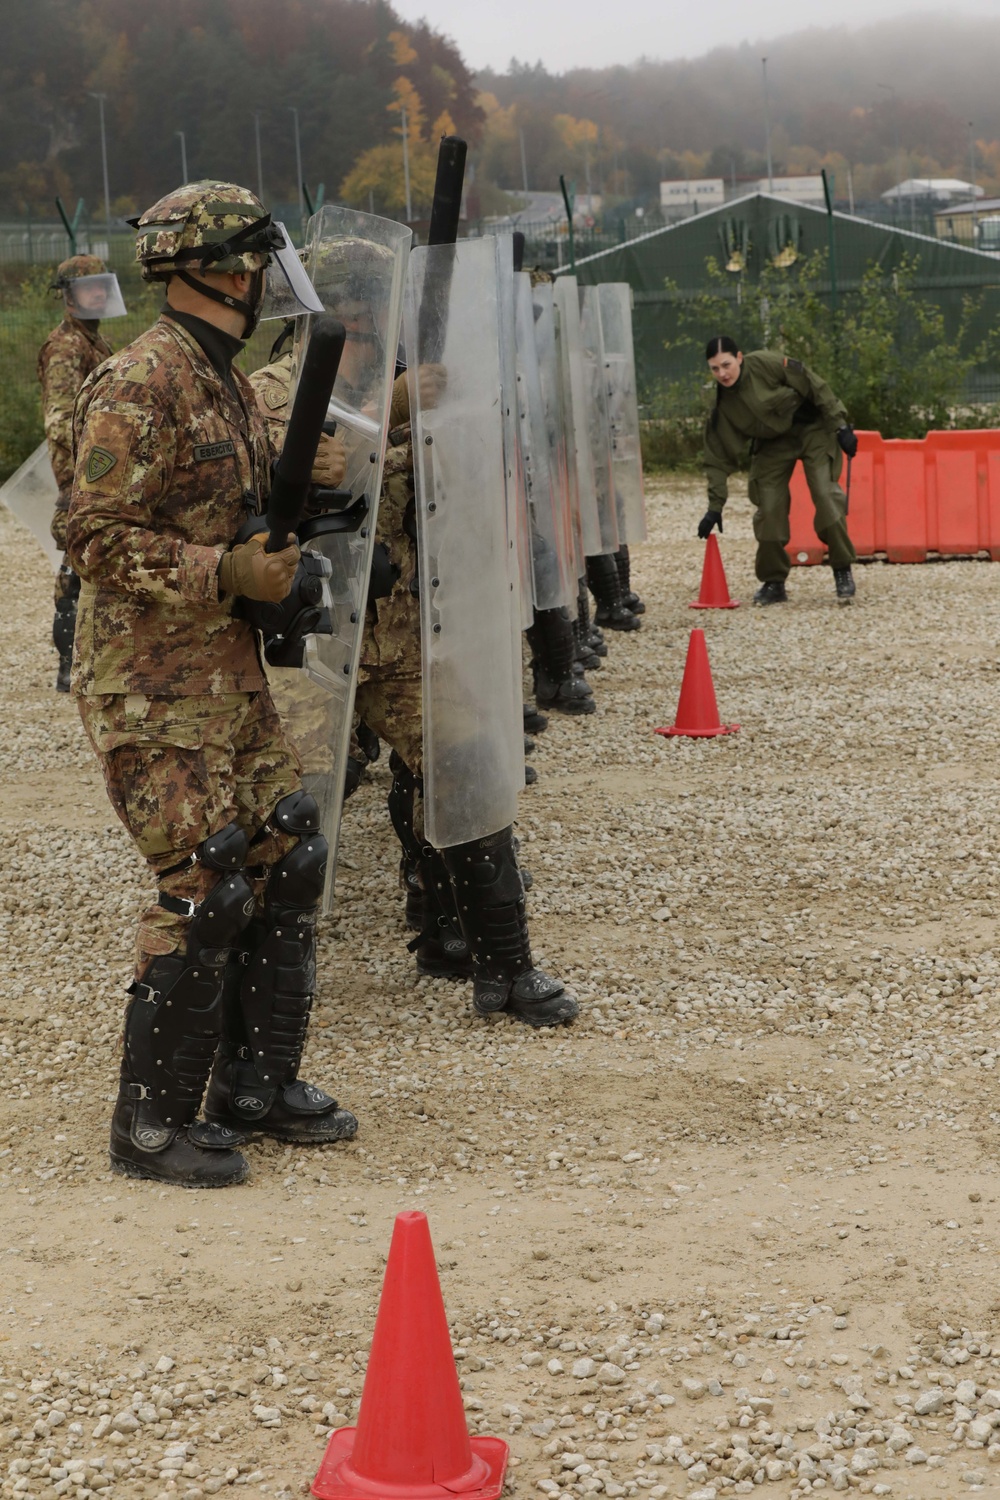 Italian Soldiers conduct crowd control training during KFOR28